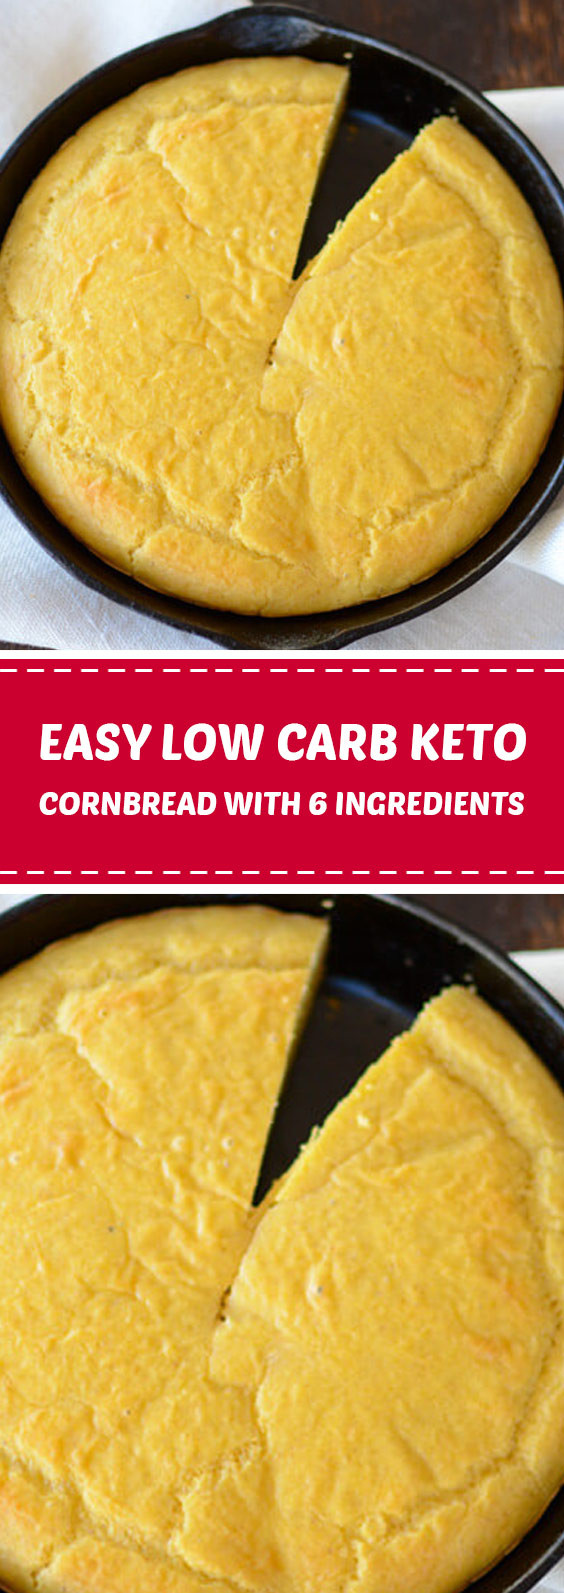 Keto Cornbread Low Carb Easy
 Easy Low Carb Keto Cornbread with 6 Ingre nts food